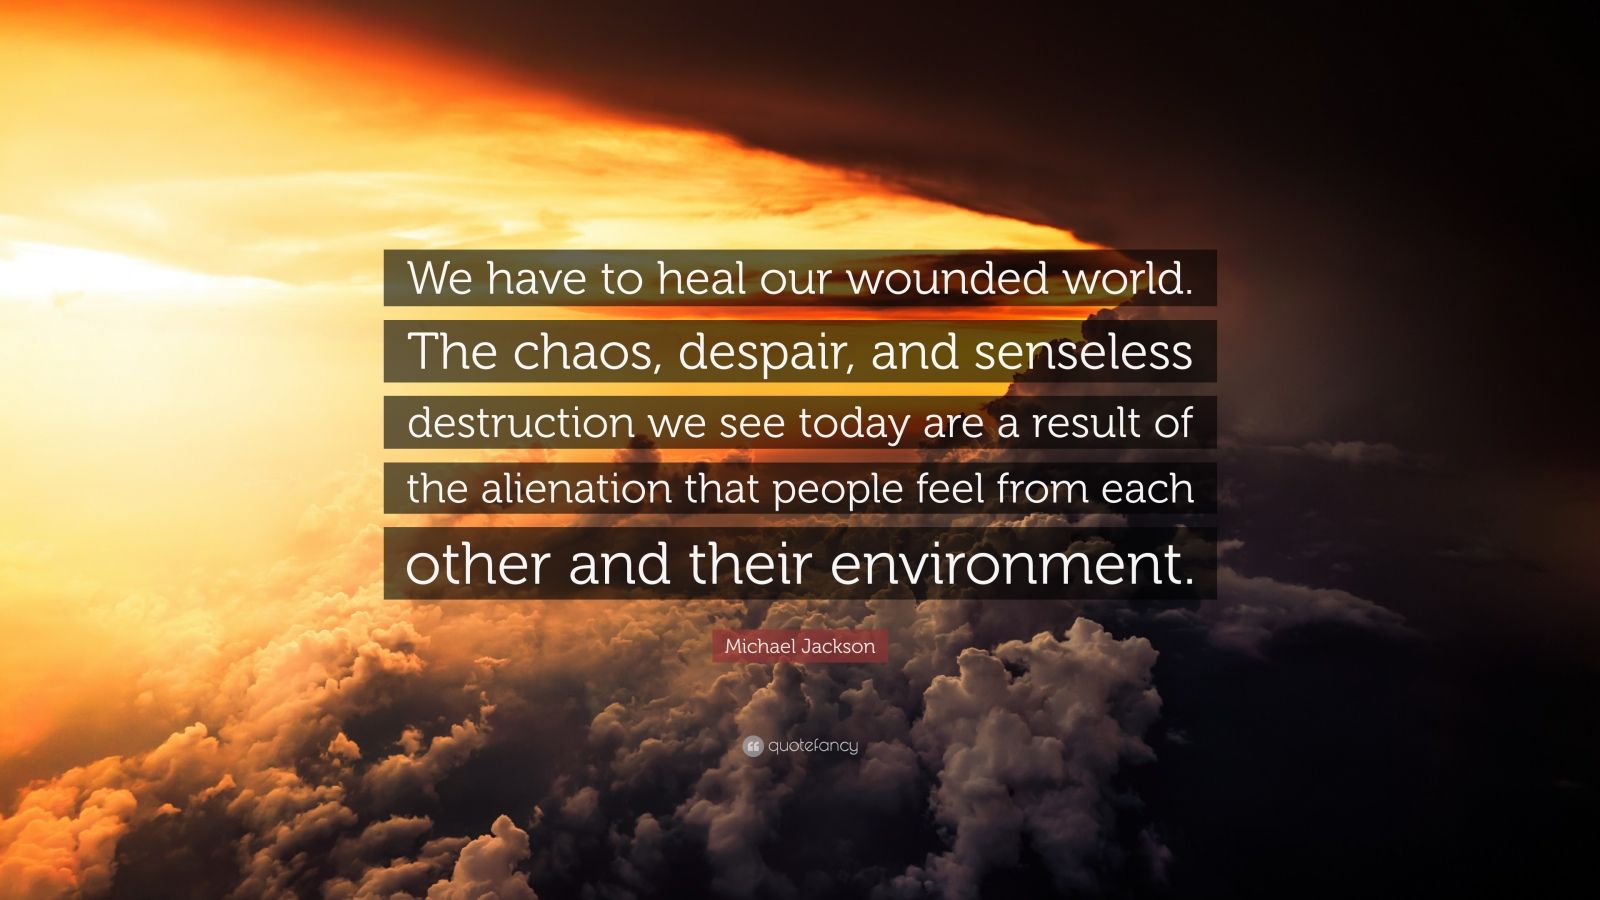 Michael Jackson Quote: “We have to heal our wounded world. The chaos ...
